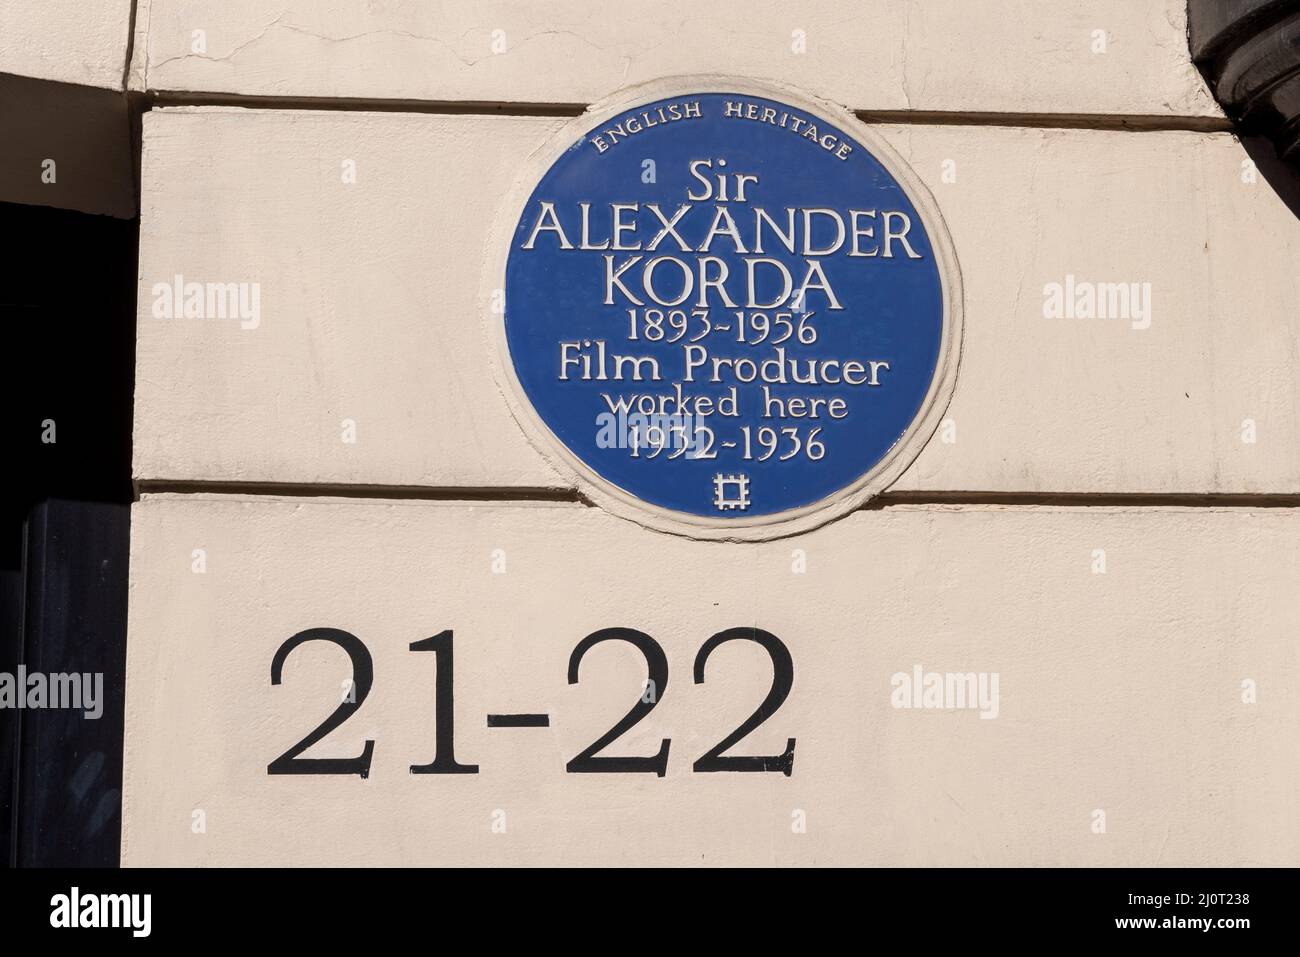 Sir Alexander Korda. Blue plaque for film producer who worked there. English Heritage plaque at 21/22 Grosvenor Street, Mayfair, London Stock Photo